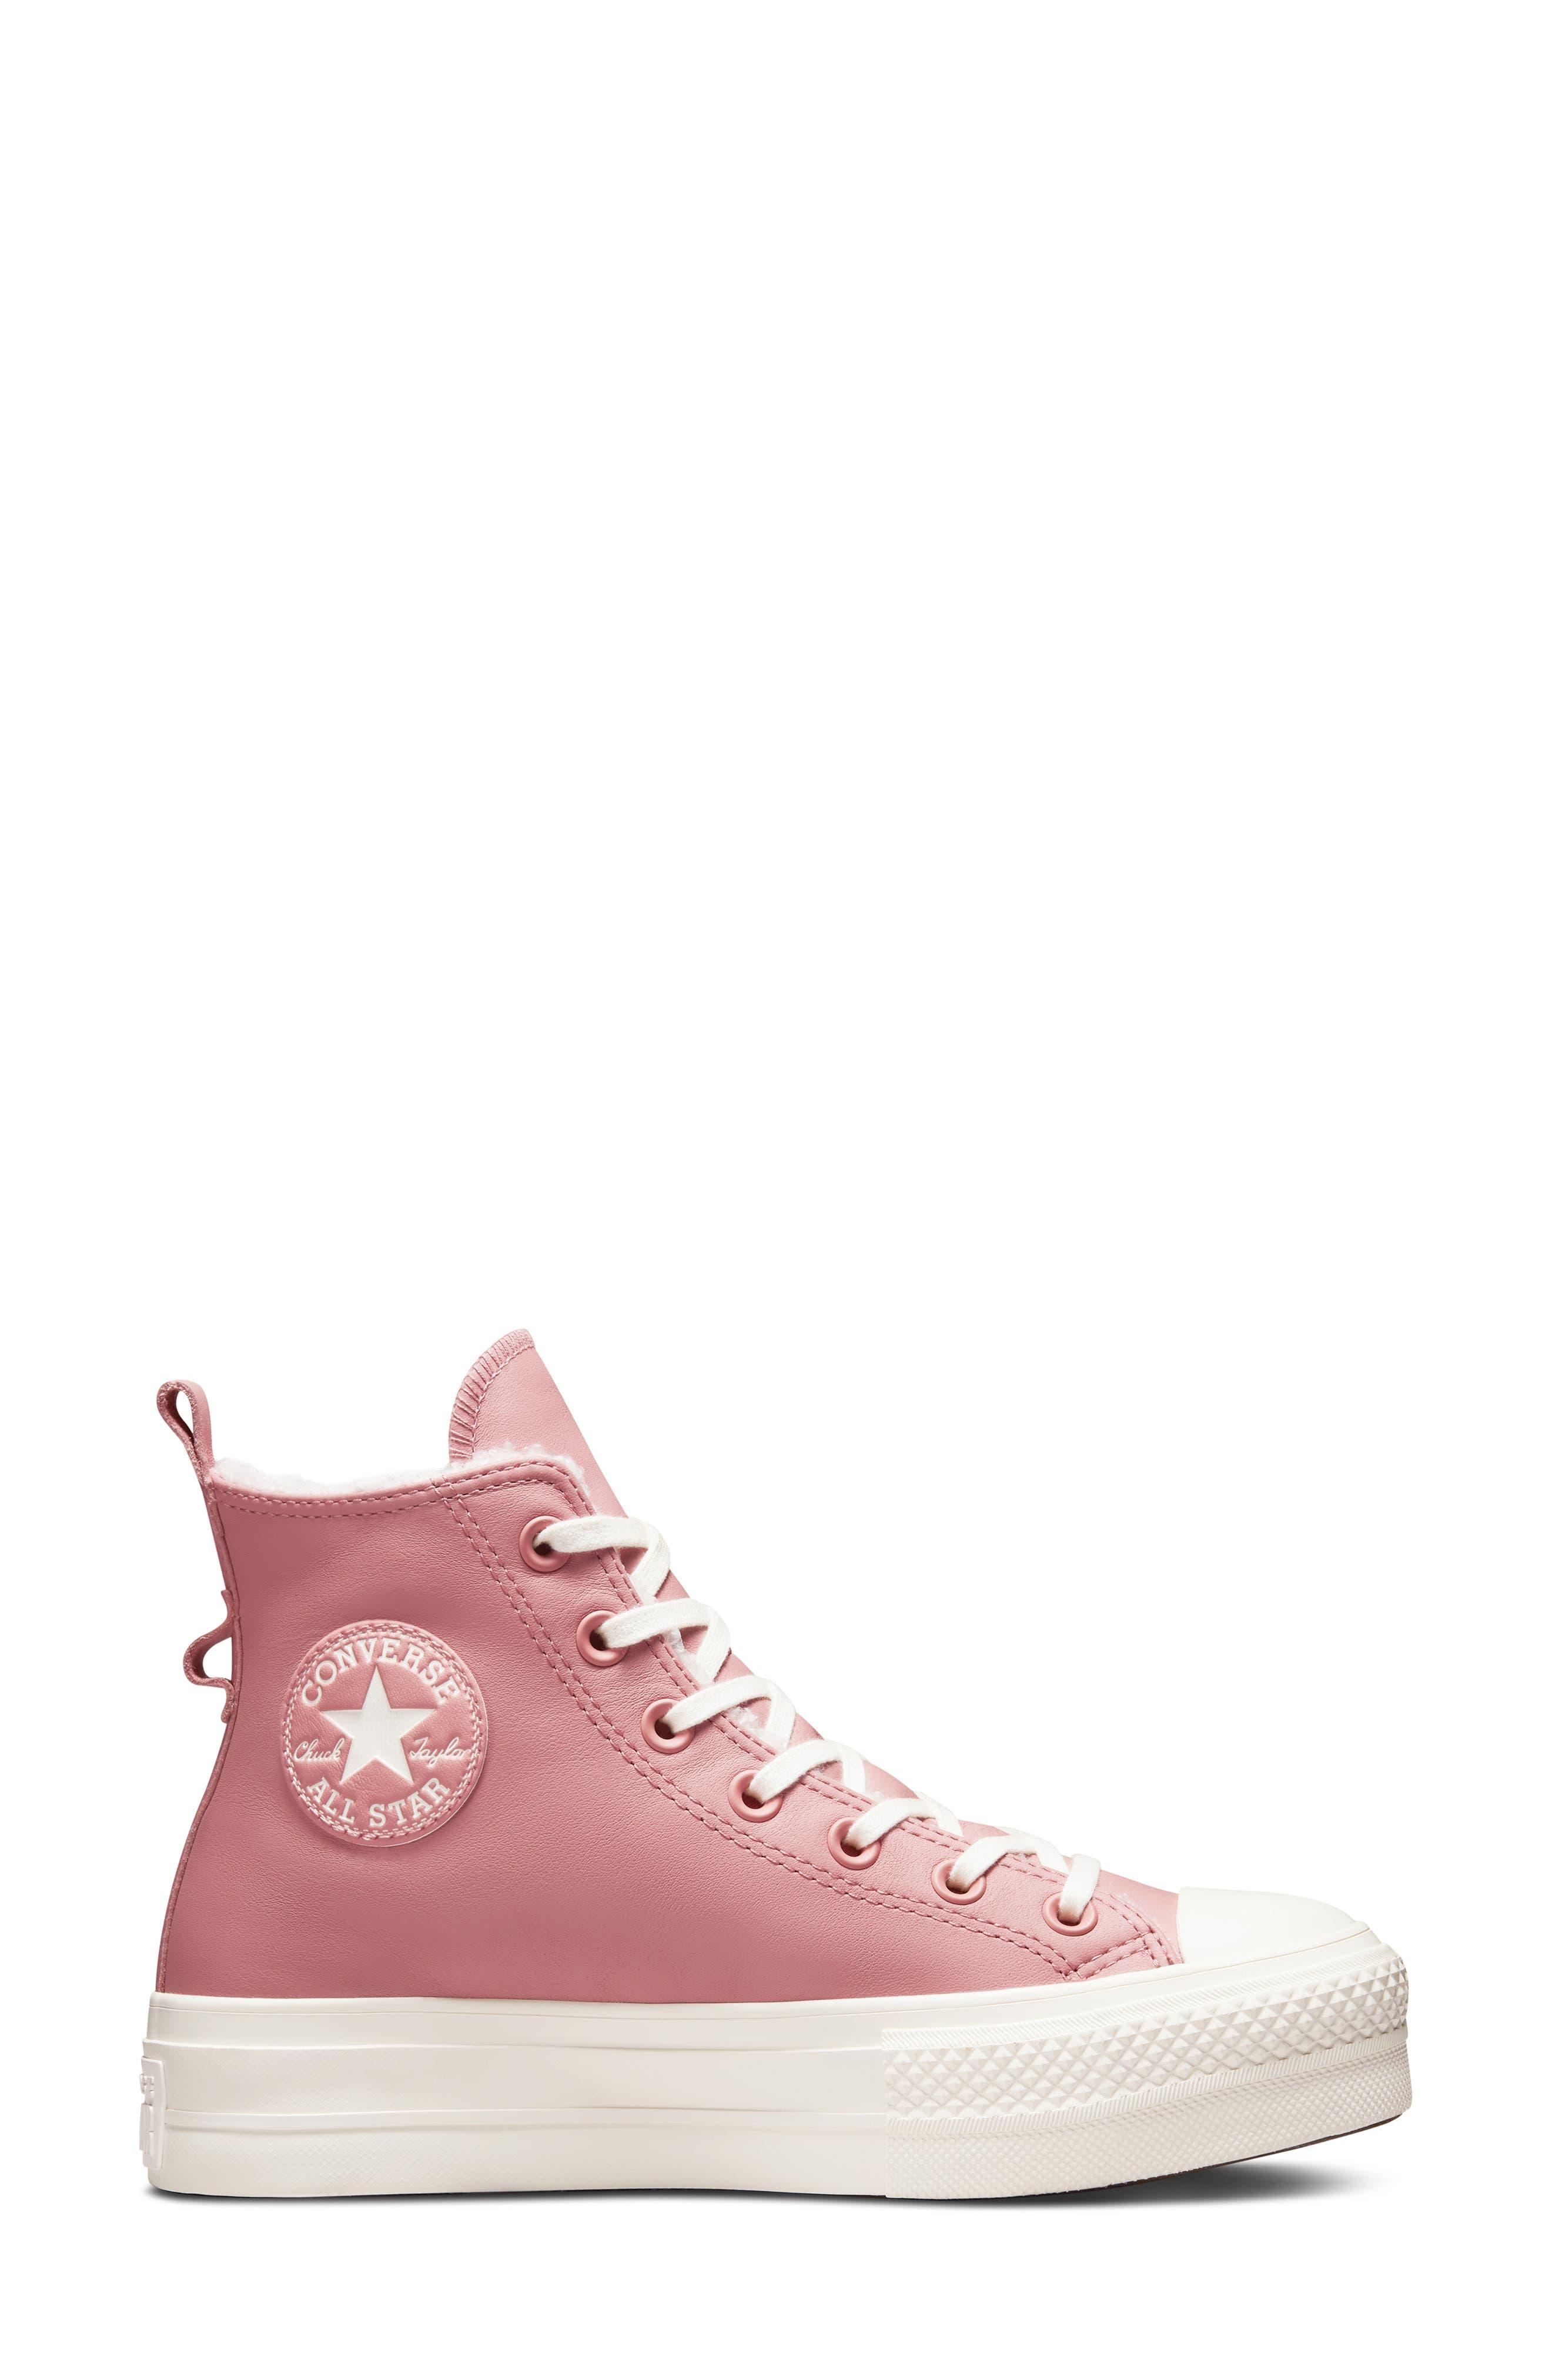 Converse Chuck Taylor® All Star® Lift Hi Faux Shearling Sneaker in Pink |  Lyst